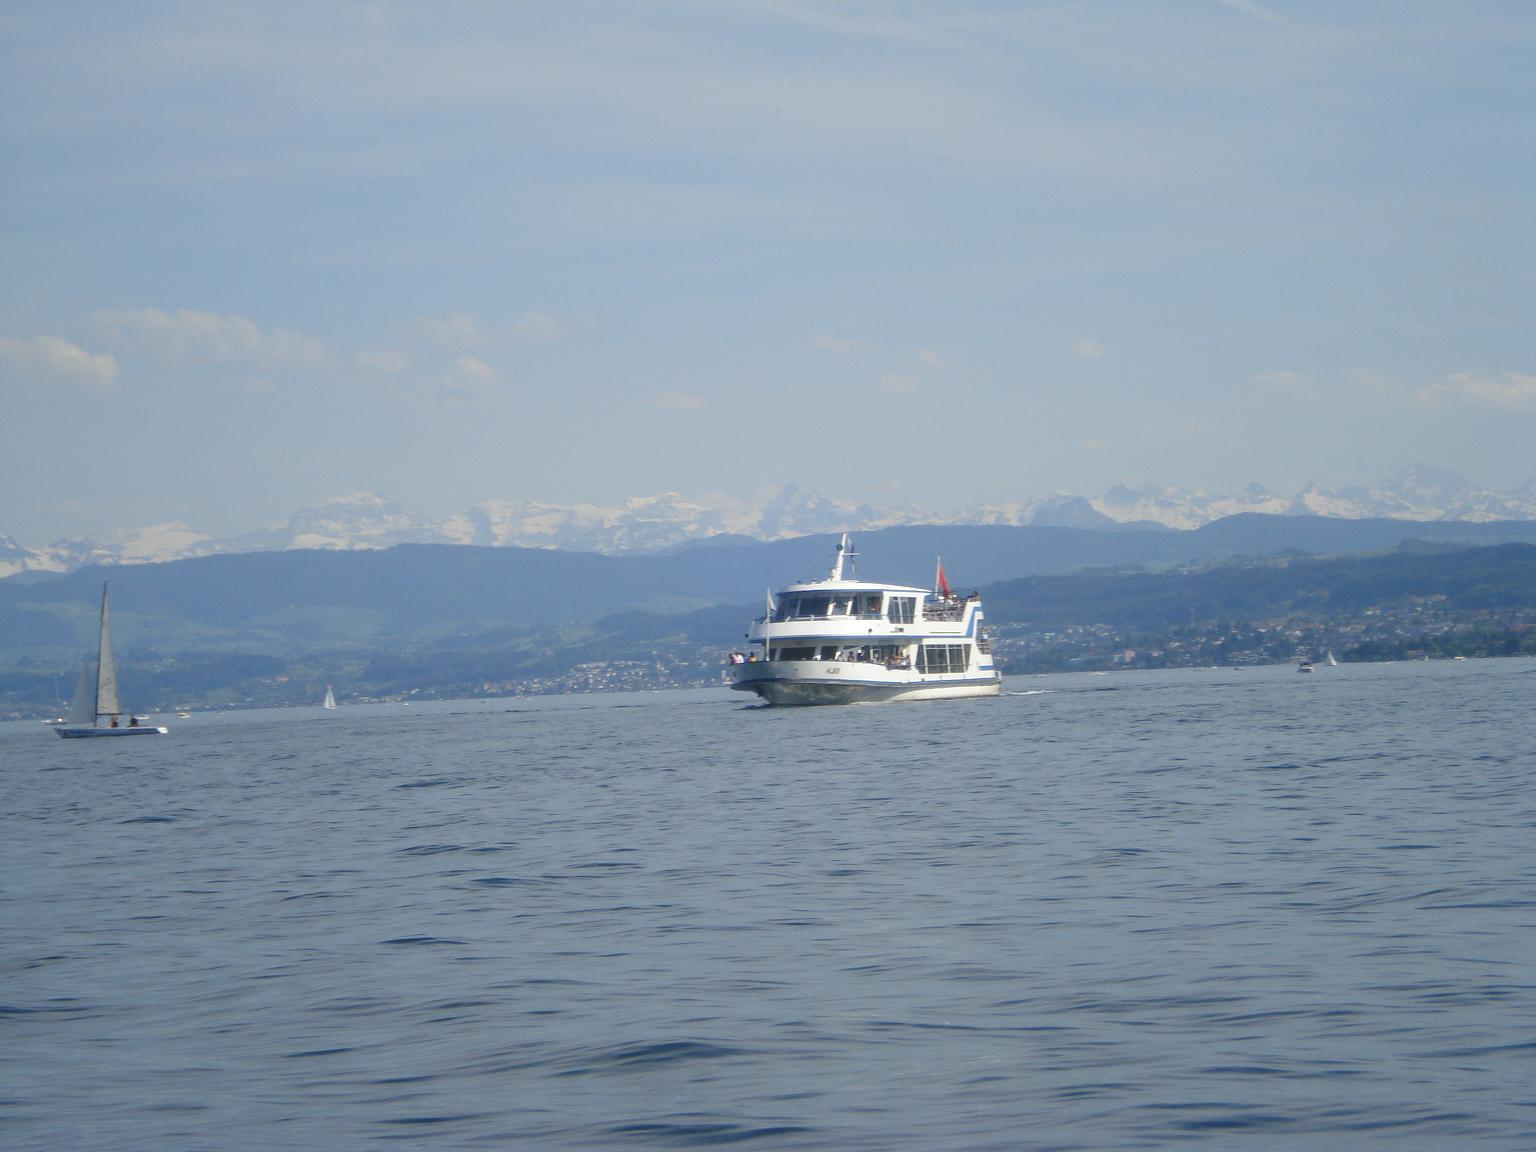  . You can rent a boat in Zurich, on Zurich lake